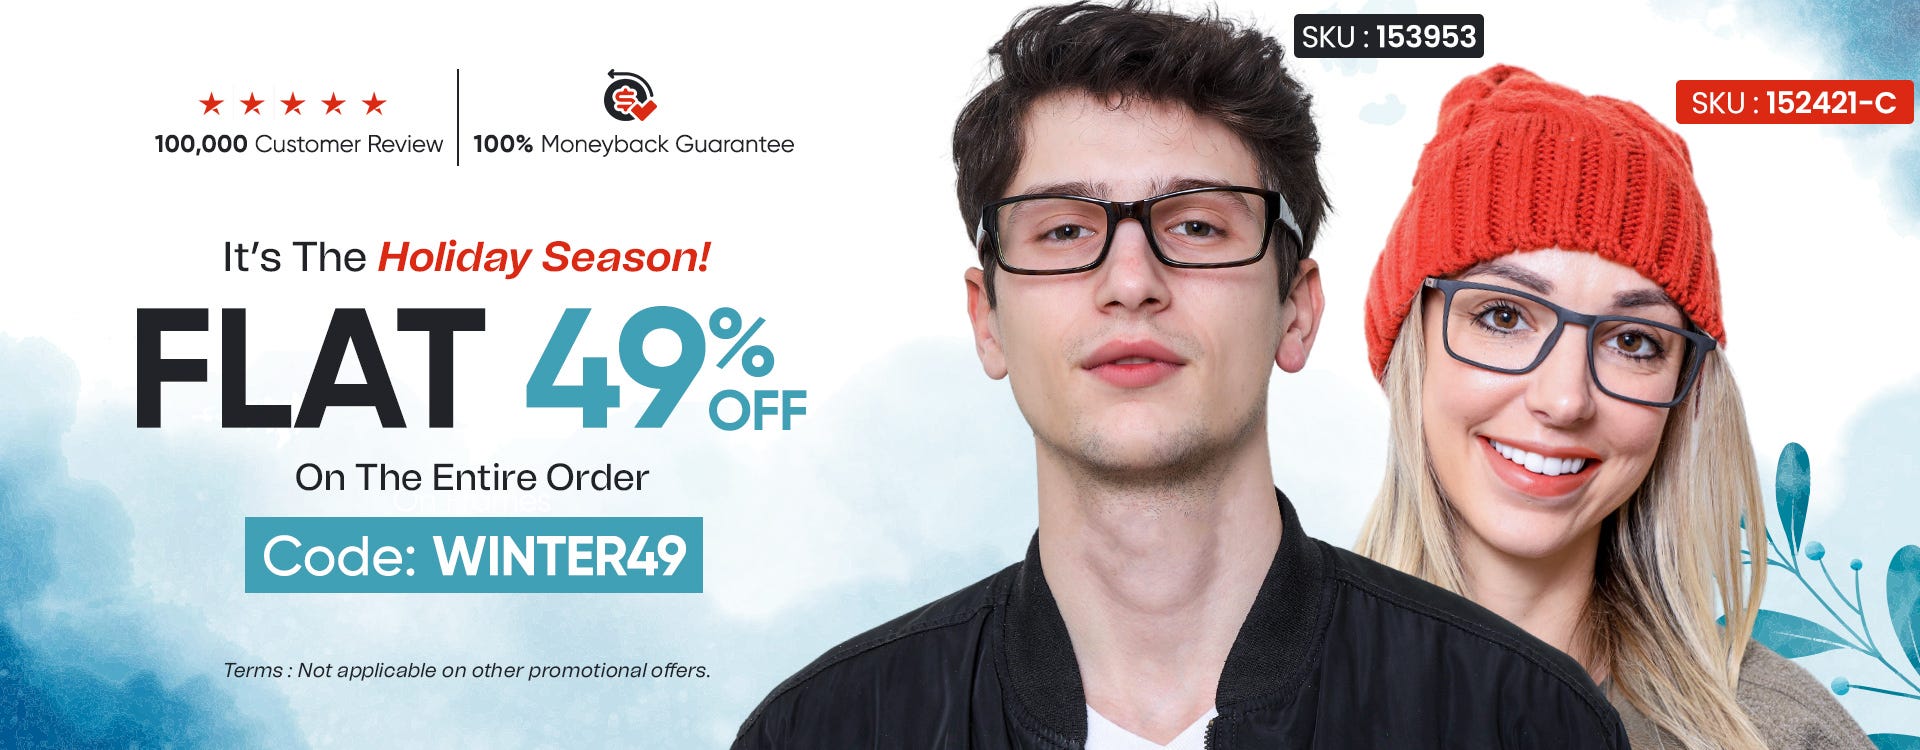 Flat 49% OFF On The Entire Order CODE: WINTER49 